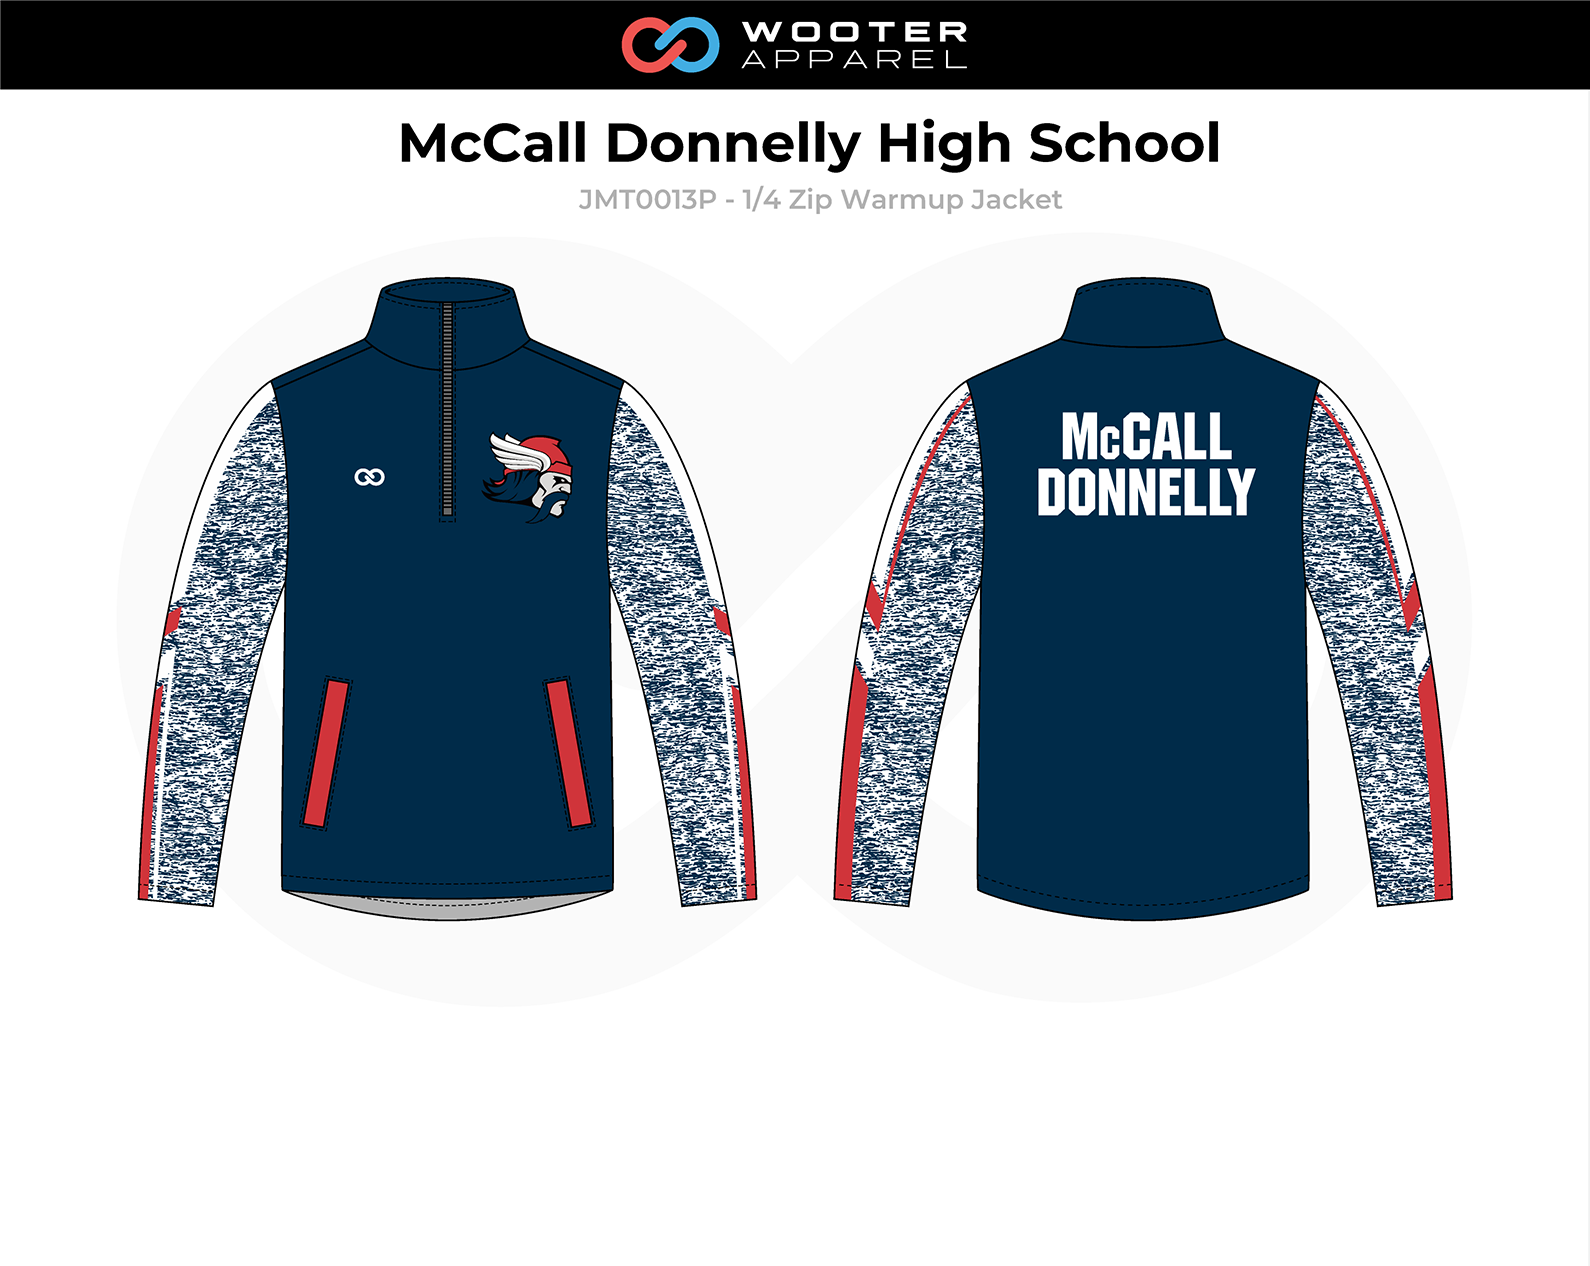 2018-10-25 McCall Donnelly High School Basketball (Panthers) Warmup Jacket (pattern sleeves).png